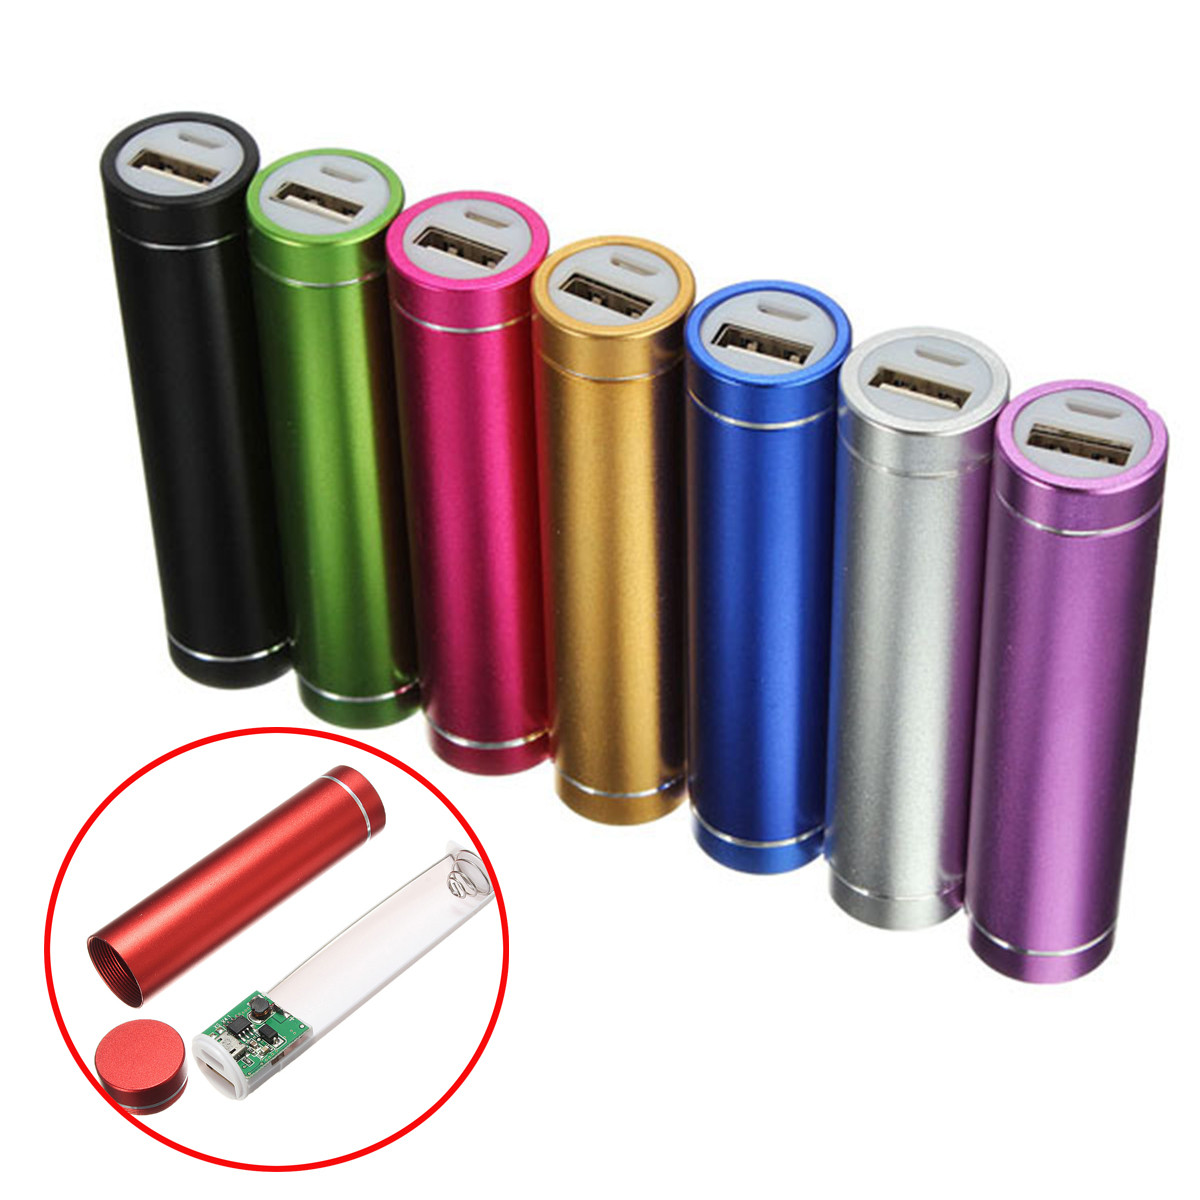 Portable-USB-Power-Bank-Case-Kit-18650-Battery-Charger-DIY-Box-for-iPhone-8-X-Plus-S8-S9-Note-8-961269